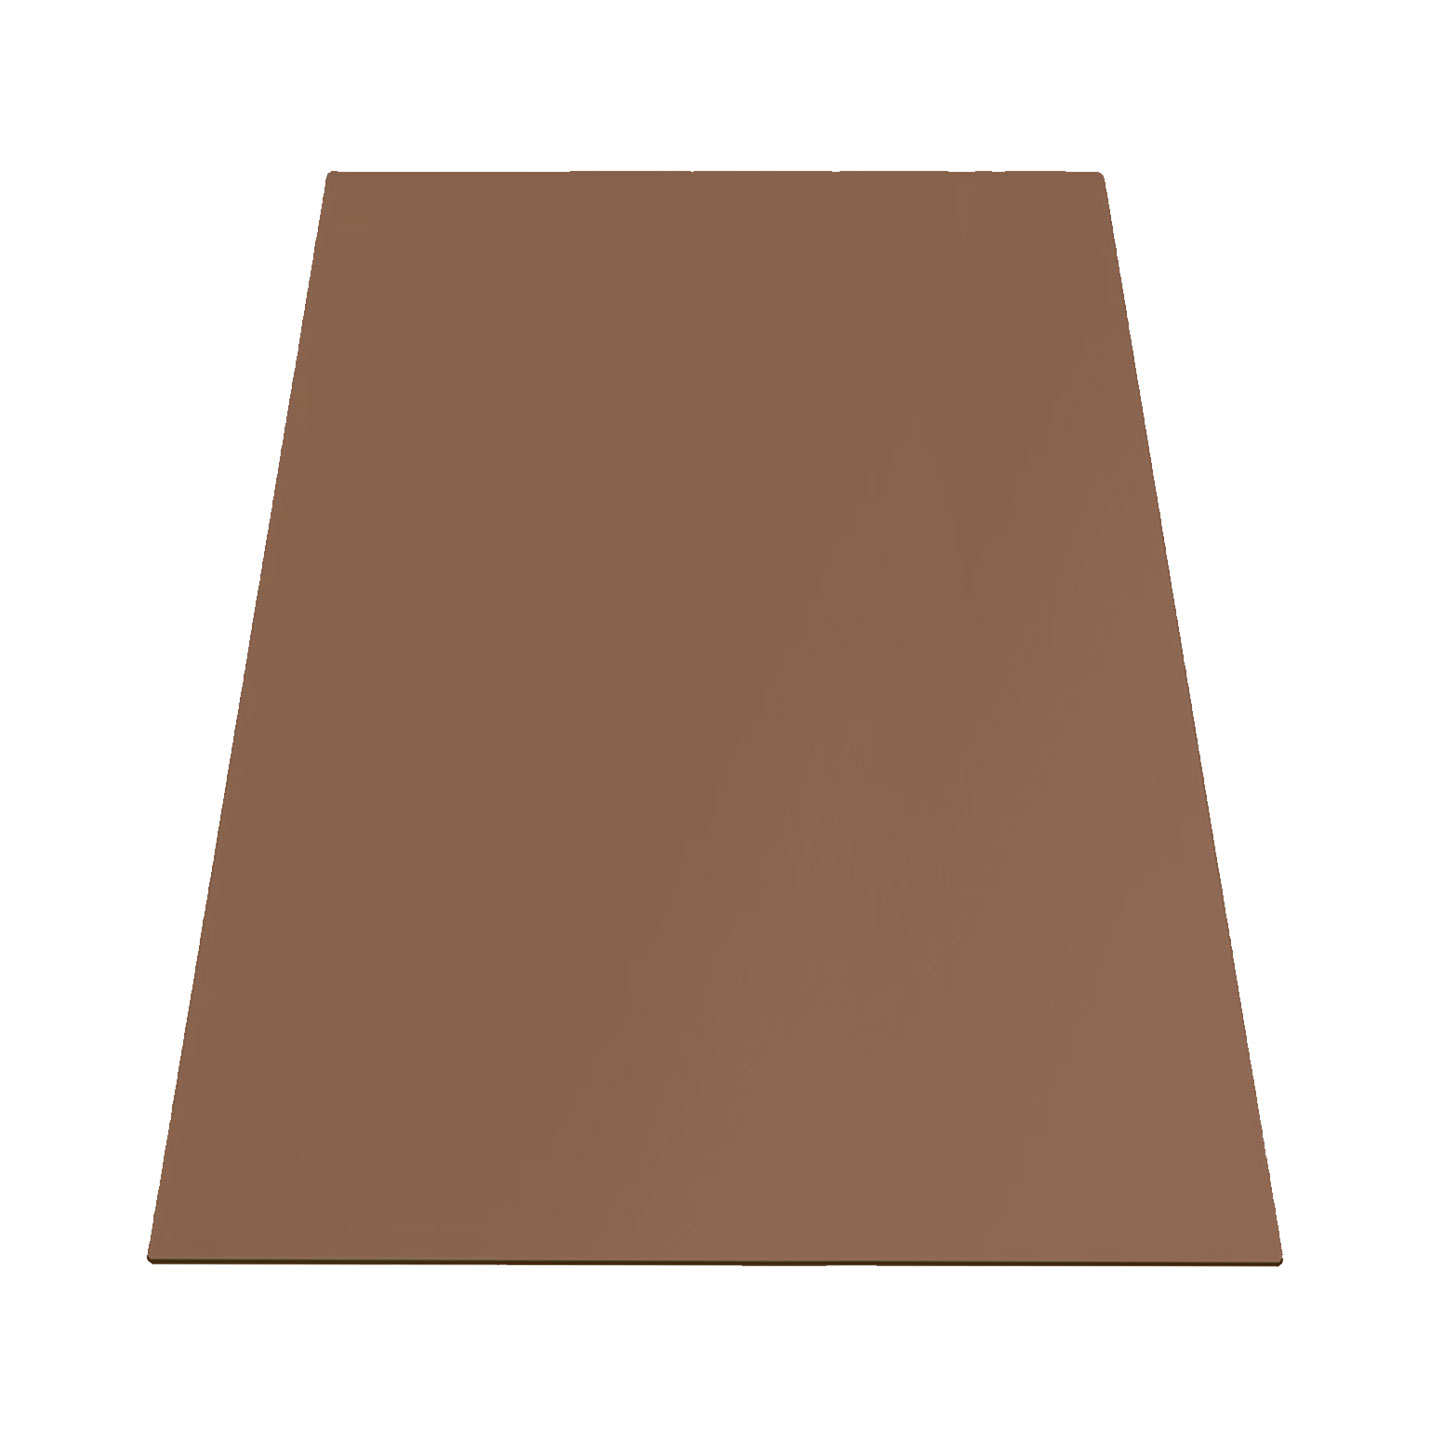 Buy 10 mm Rectangle Table Top Tempered Bronze Tinted Glass - Flat polished edges & Eased corner